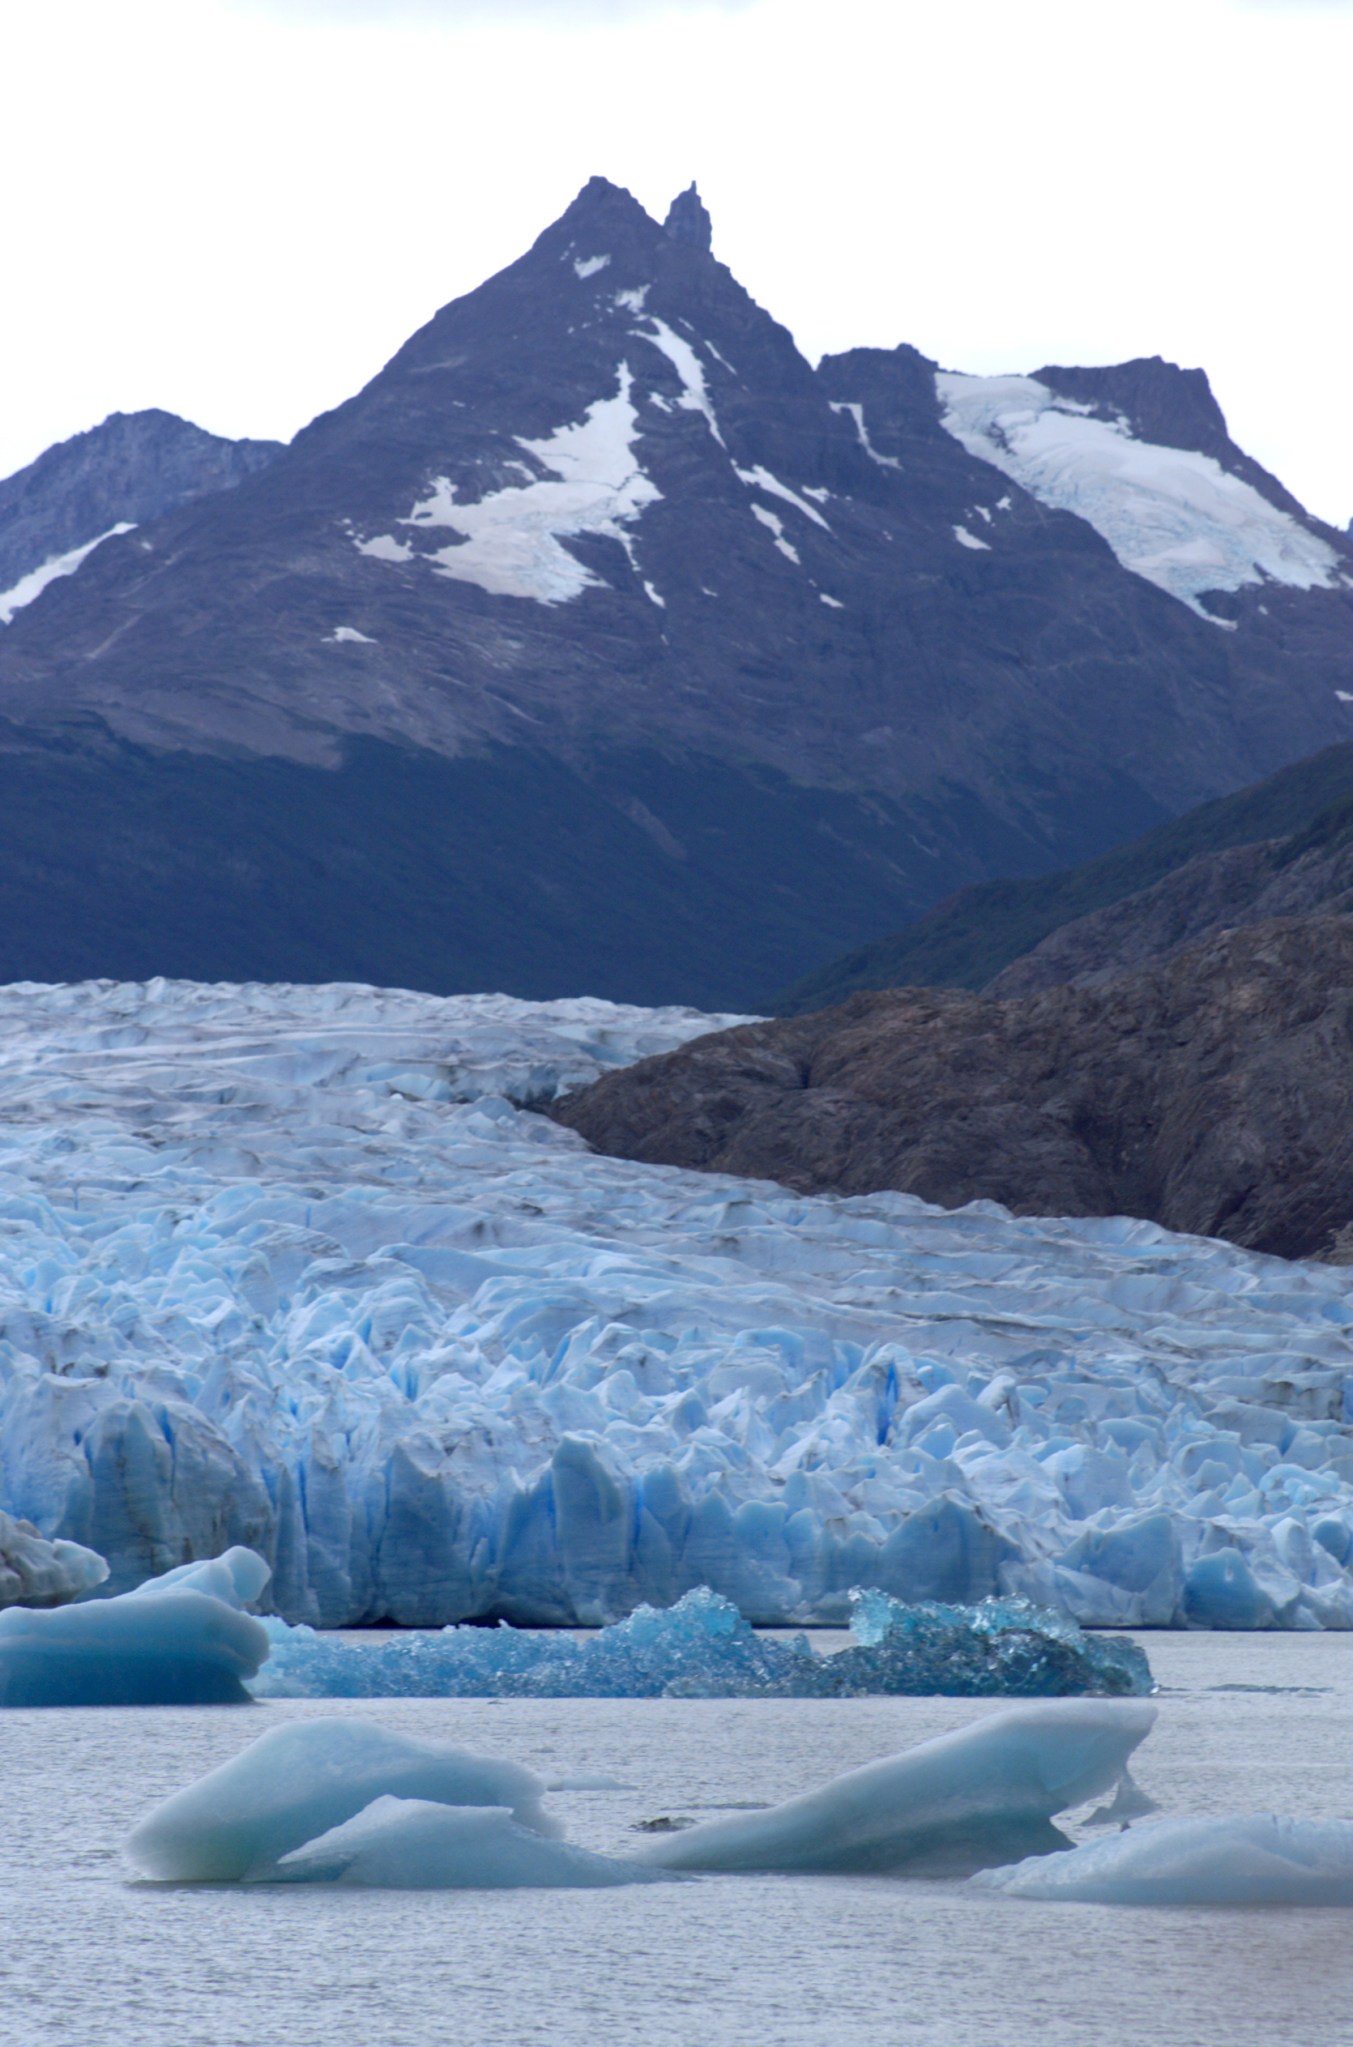 An image of a large Glacier with snowy mountains in the background.